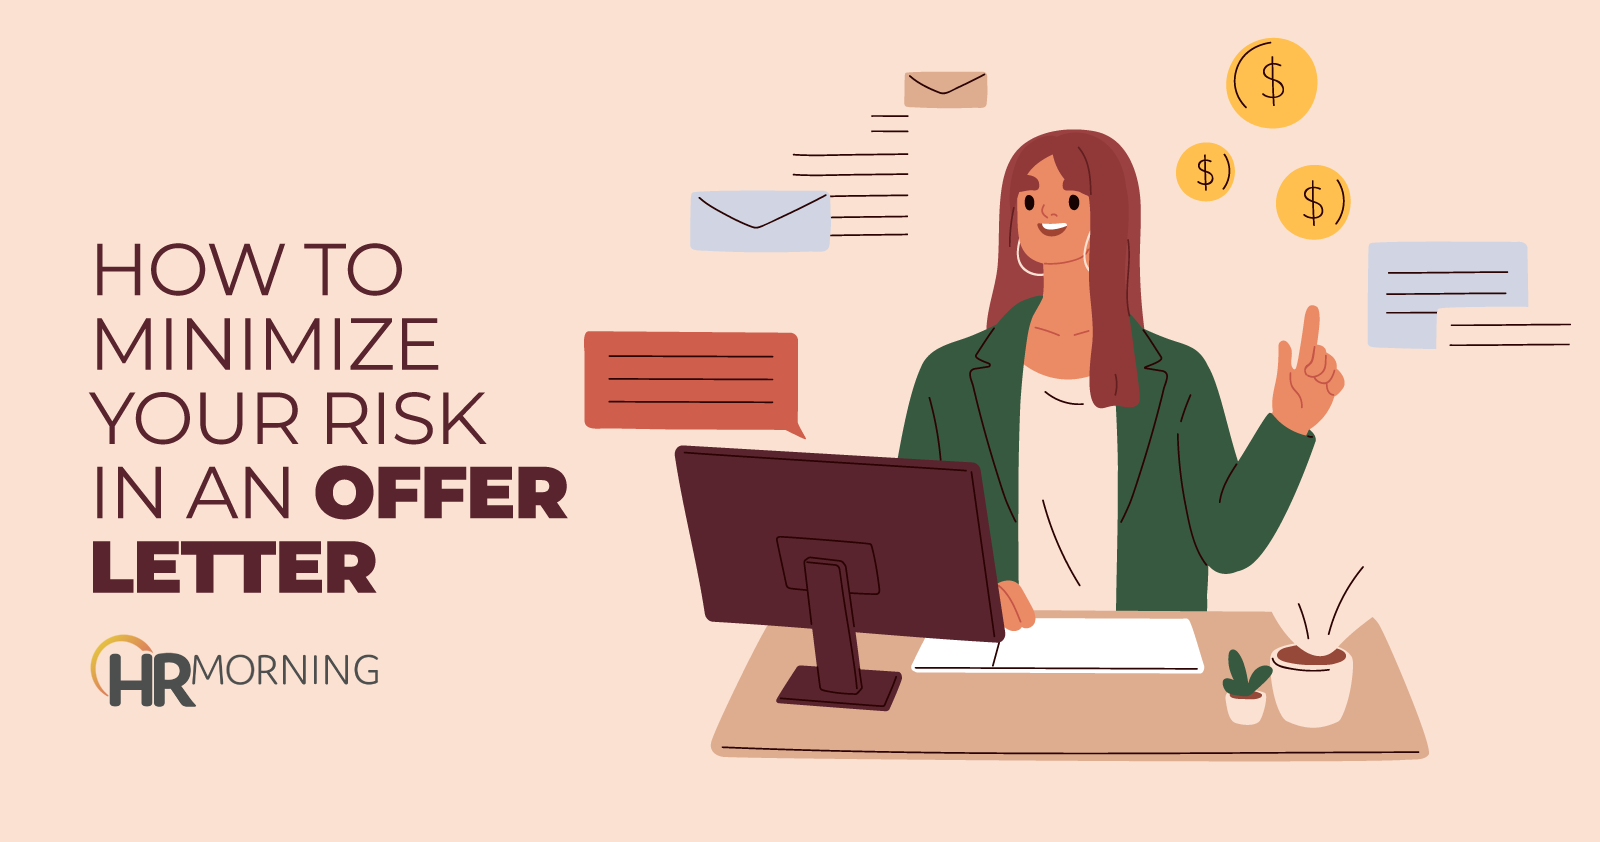 How to minimize your risk in an offer letter